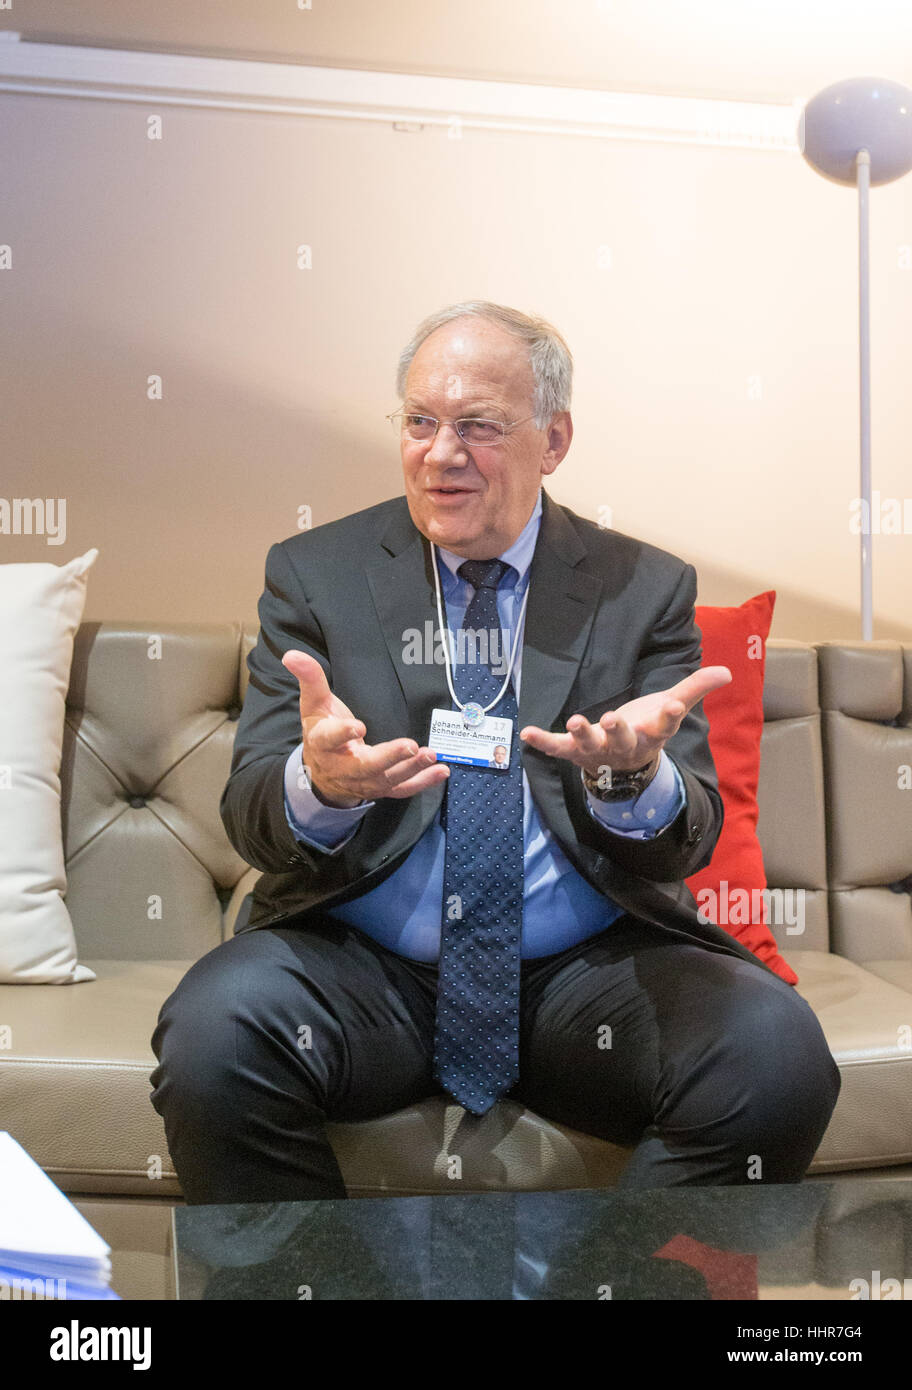 Davos. 20th Jan, 2017. Swiss minister of Economic Affairs, Education and Research, Johann Schneider-Ammann, speaks during an interview with Xinhua News Agency in Davos, Switzerland, Jan. 18, 2017. China and Switzerland have enjoyed a longstanding win-win partnership and China has an optimistic economic outlook, Johann Schneider-Ammann said here Wednesday. Credit: Xinhua/Alamy Live News Stock Photo